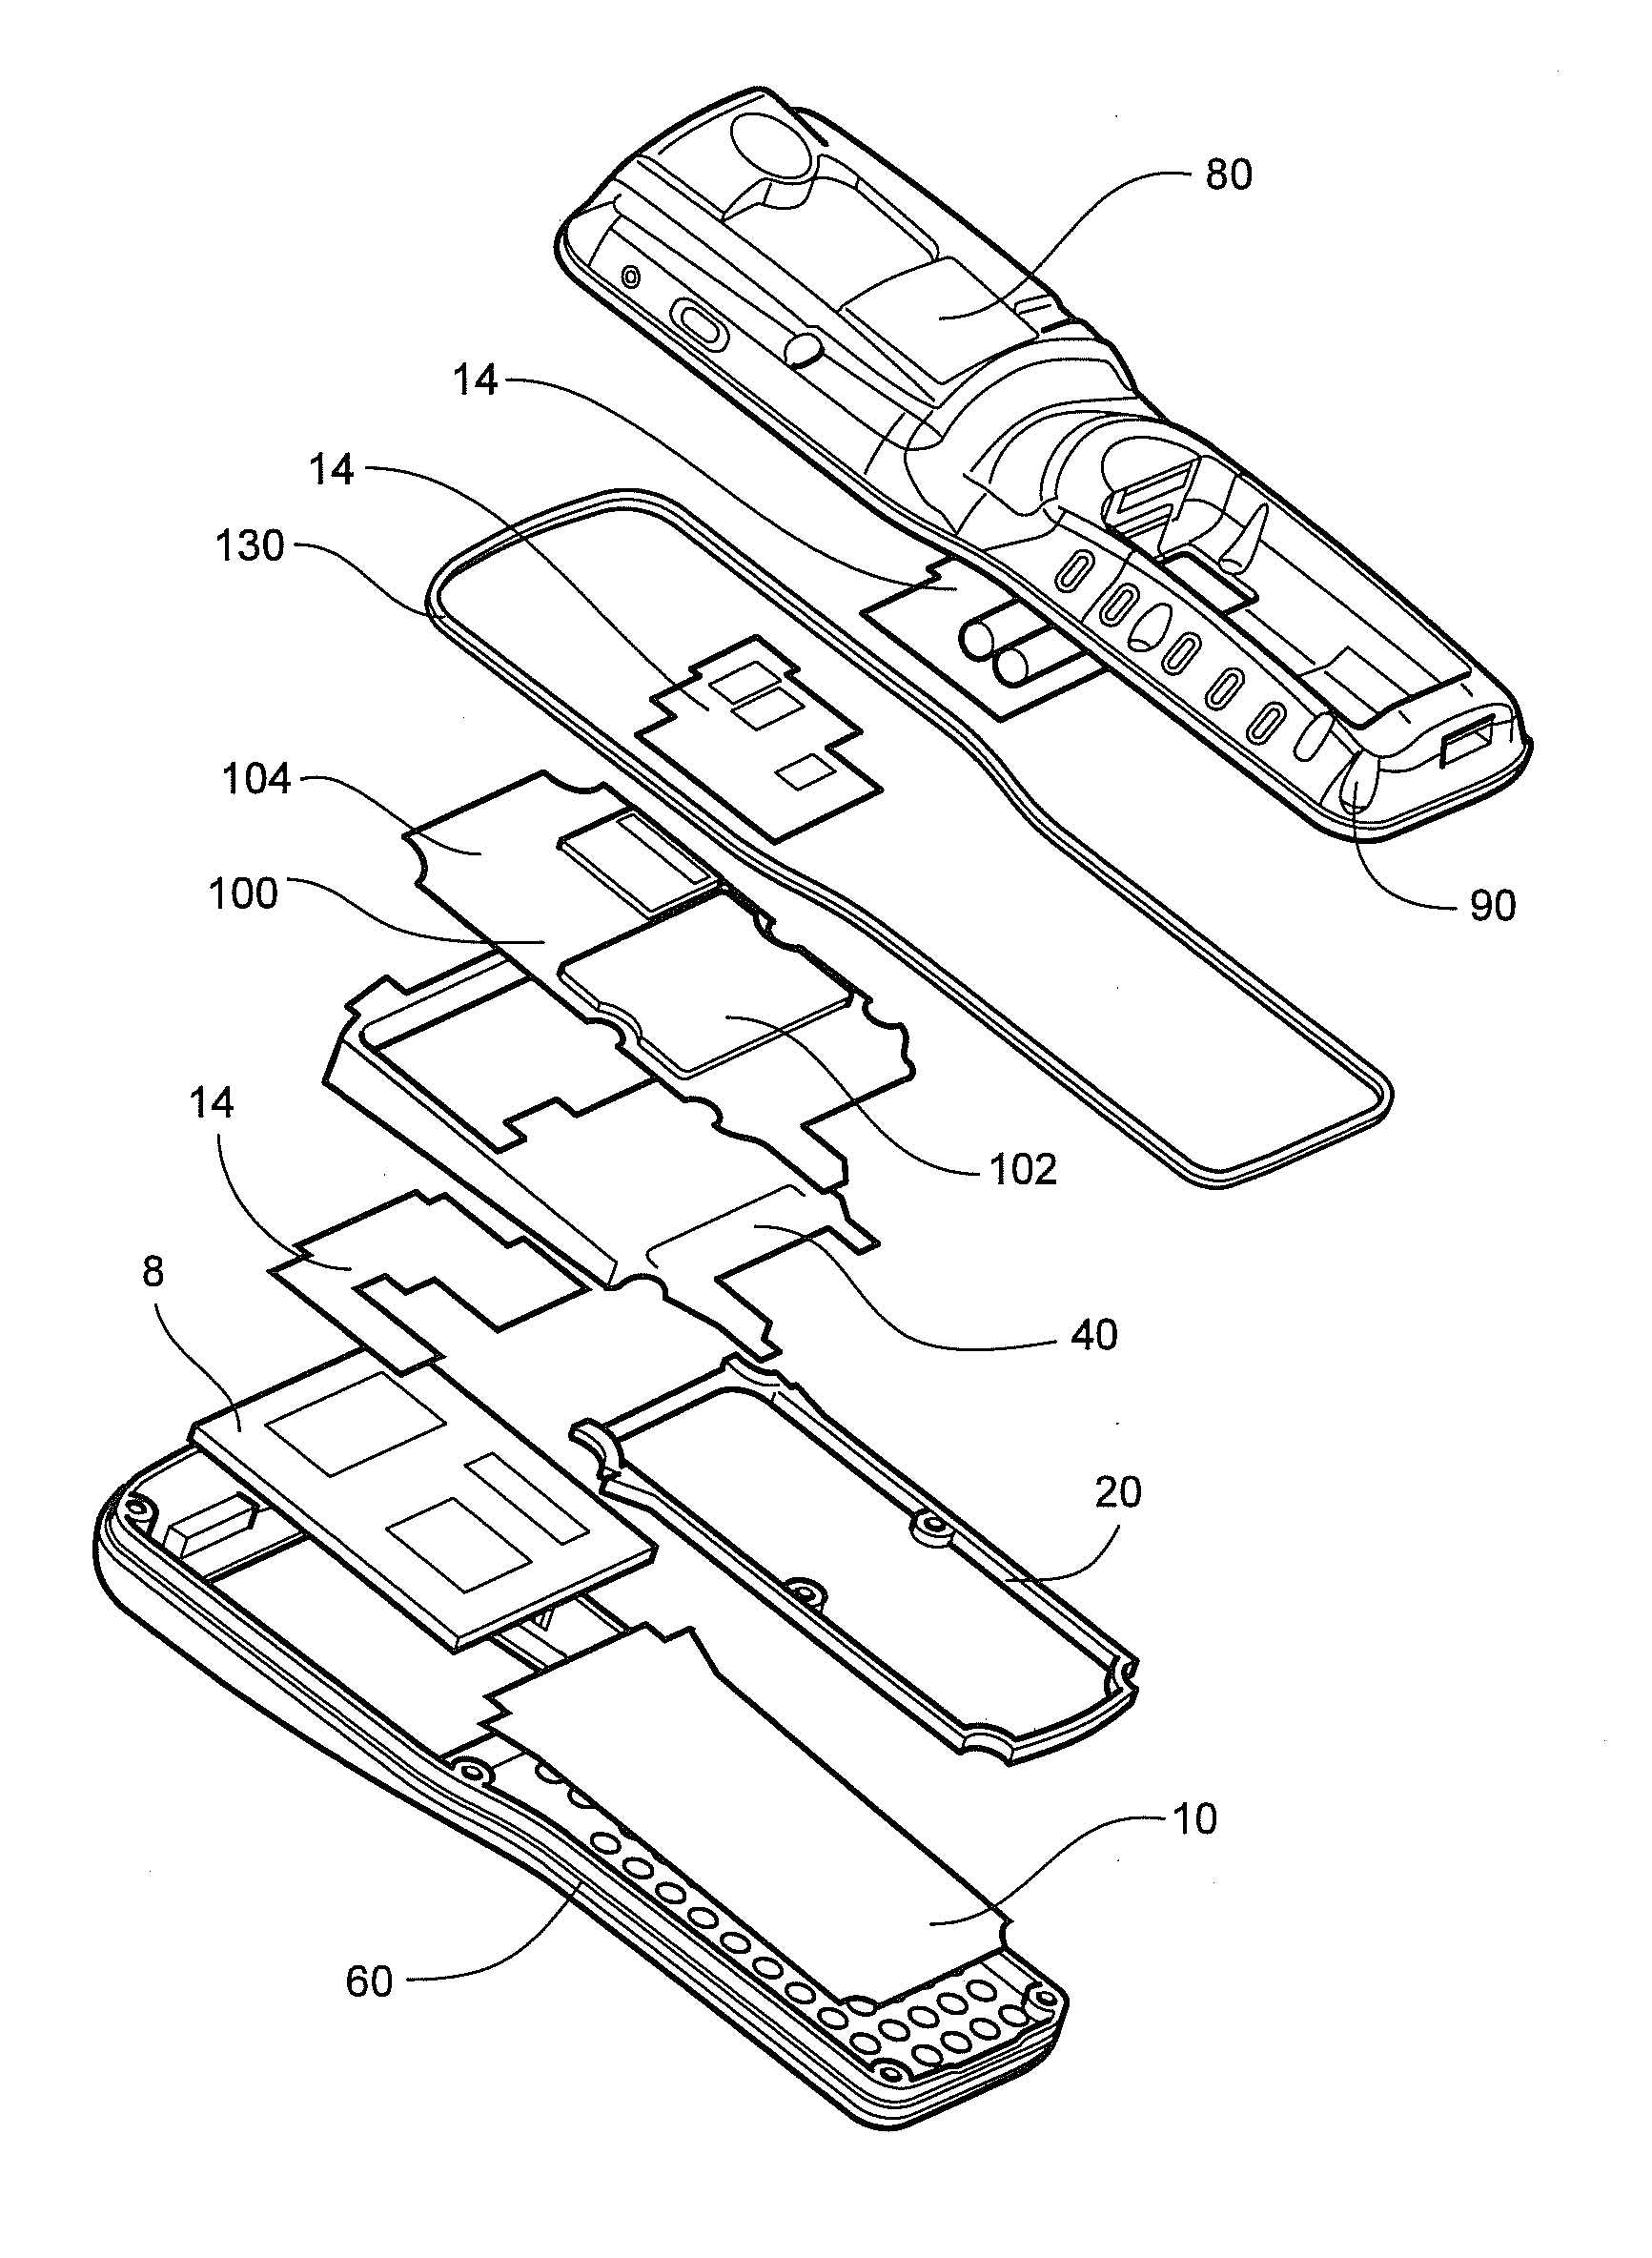 Portable data terminal internal support structure